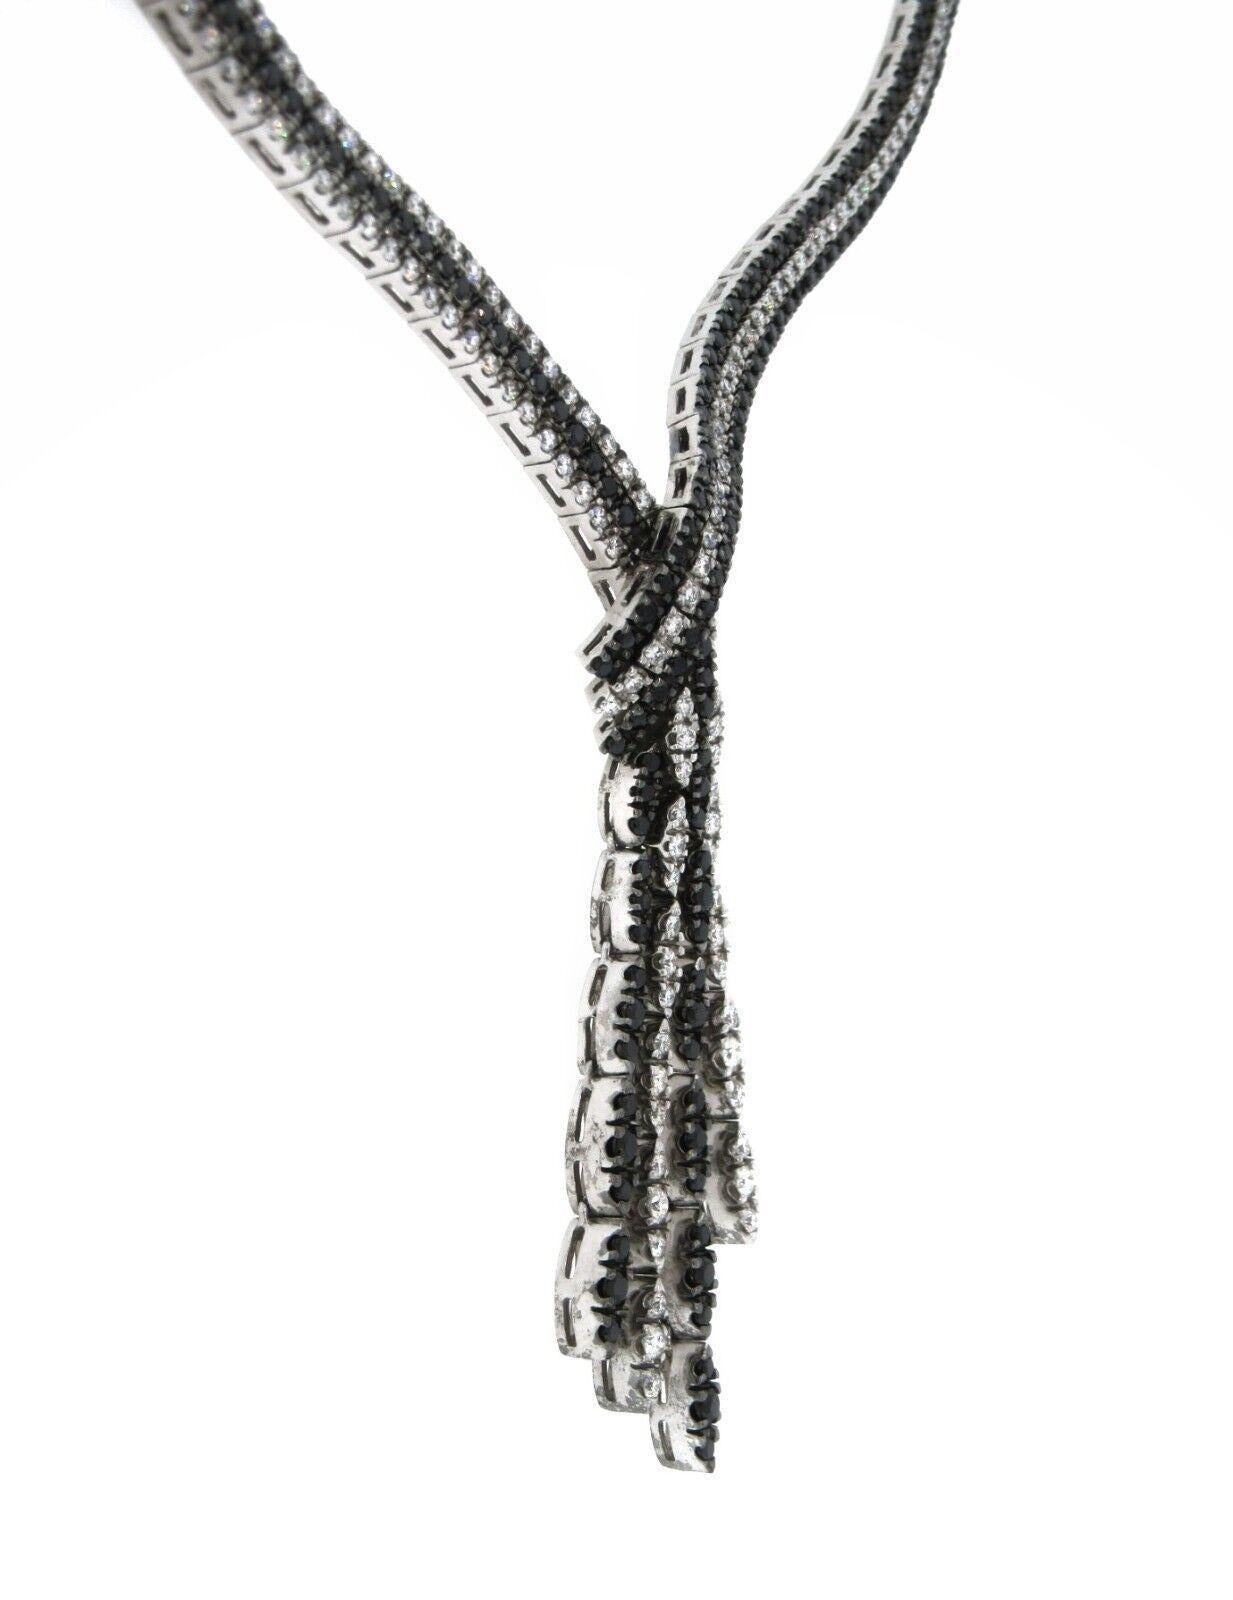 6.68 carat White and Black Diamond Tassel Necklace in 18K White Gold

Ladies 18K White Gold Diamond Necklace features rows of White and Black Round Brilliant Diamonds ending in a tassel, all set in 18k White Gold by Italian maker Karati.

Total